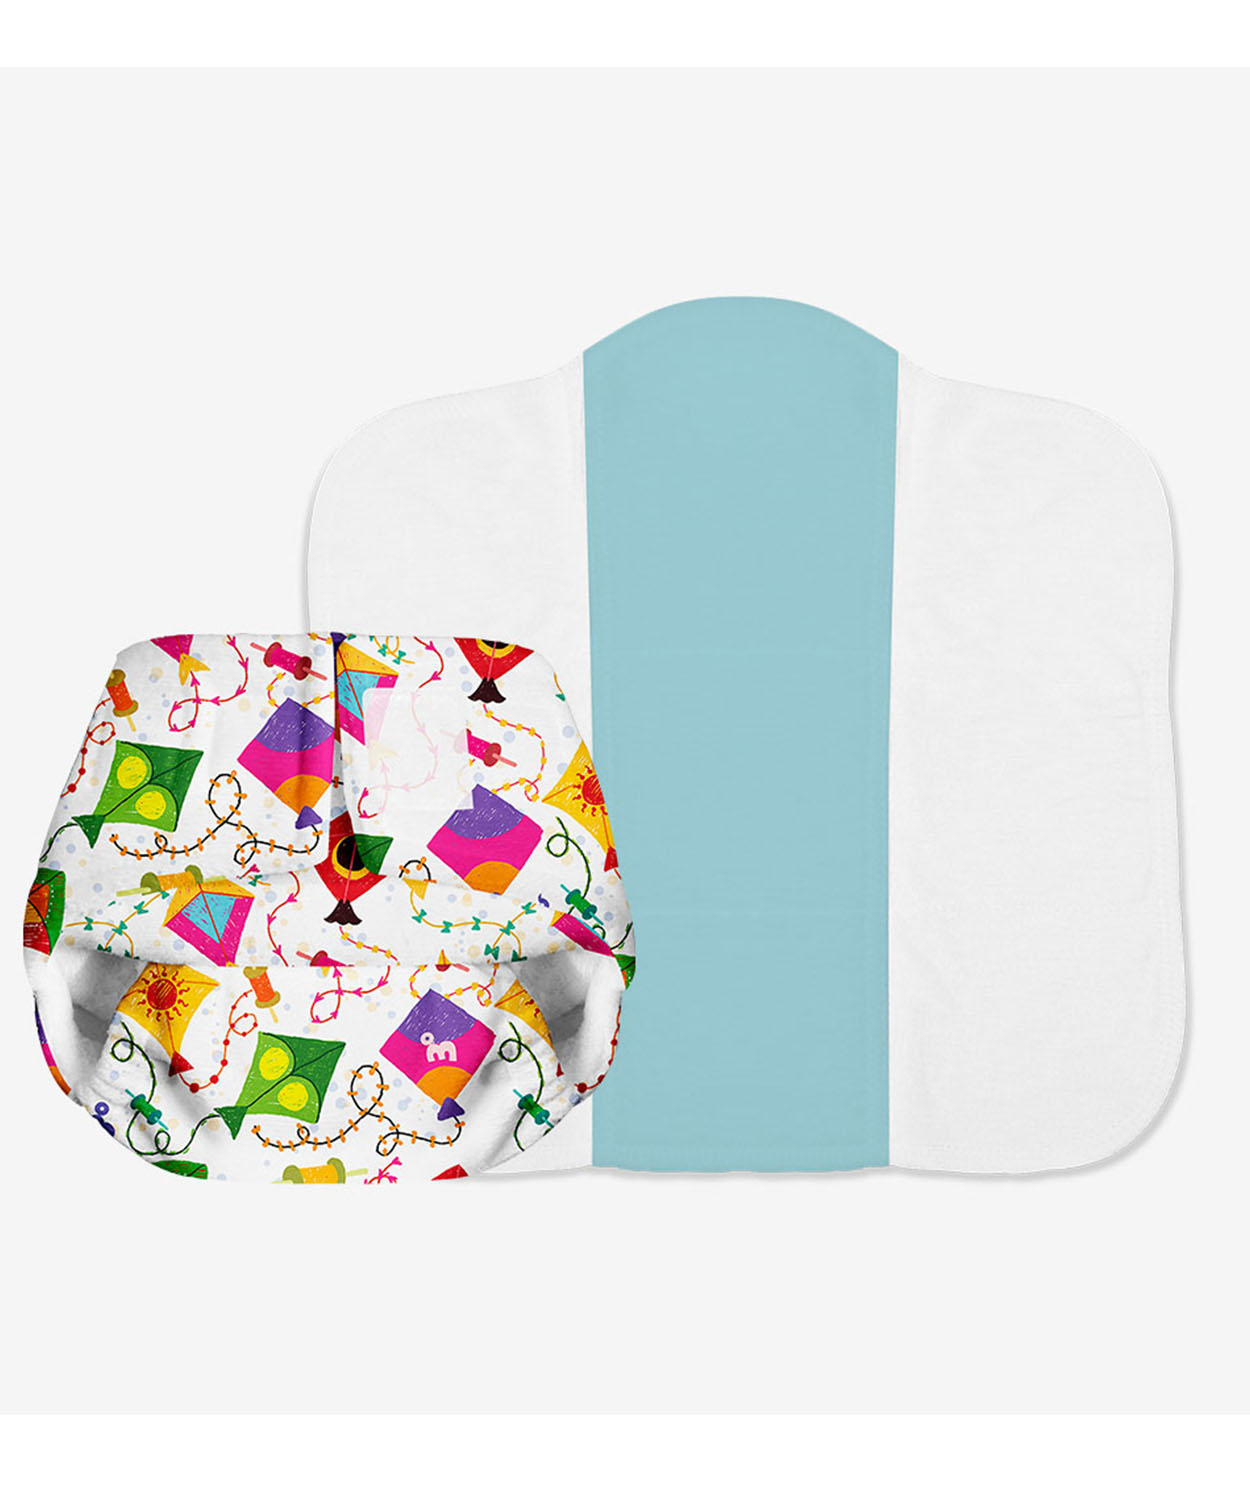 Superbottoms Freesize UNO Washable & Reusable Adjustable Cloth Diaper with Dry Feel Pad (Coloured Skies)